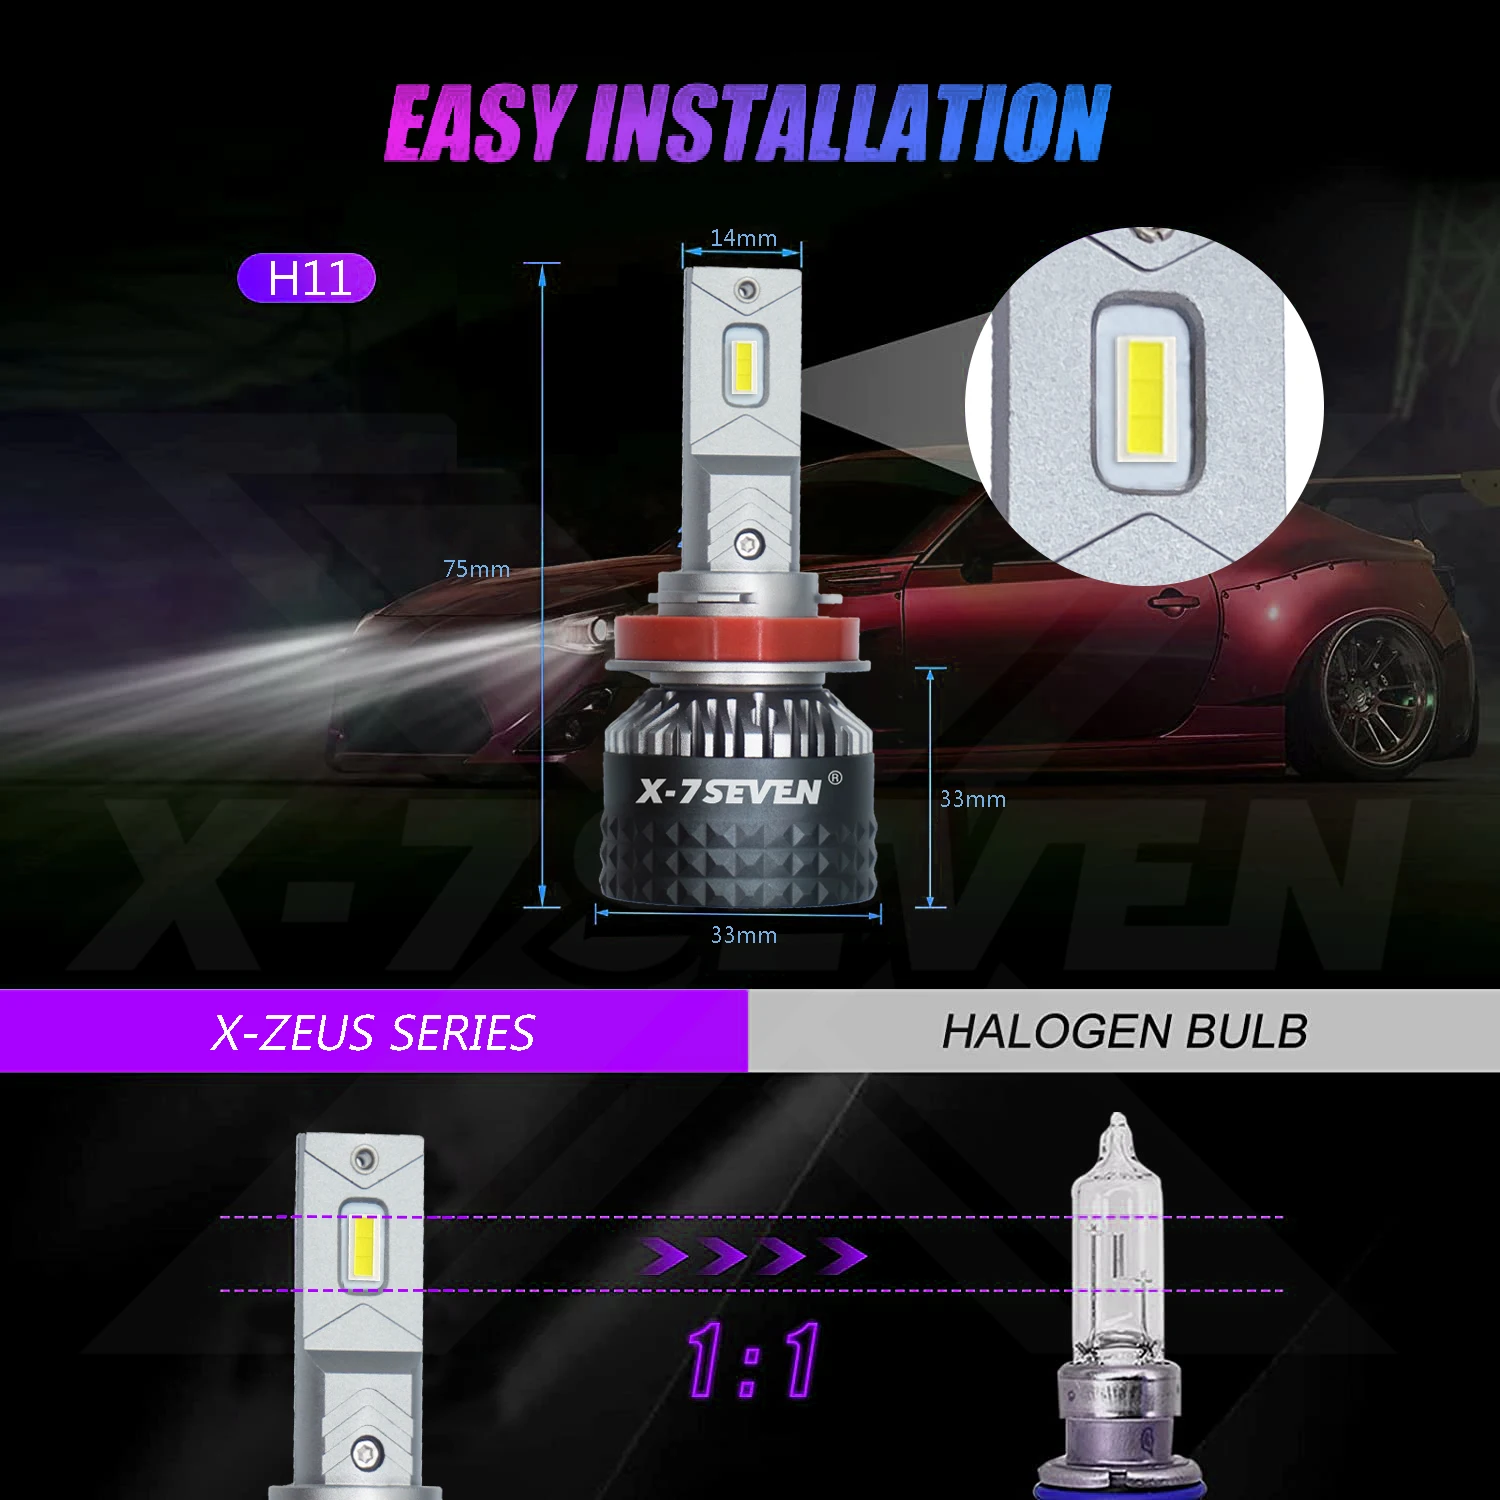 X-7SEVEN X-Zeus 150W 30000LM 6500K LED Headlight Bulb For Car 9004 9005 9006 9007 9012 H1 H4 H7 H11 H13 with Canbus